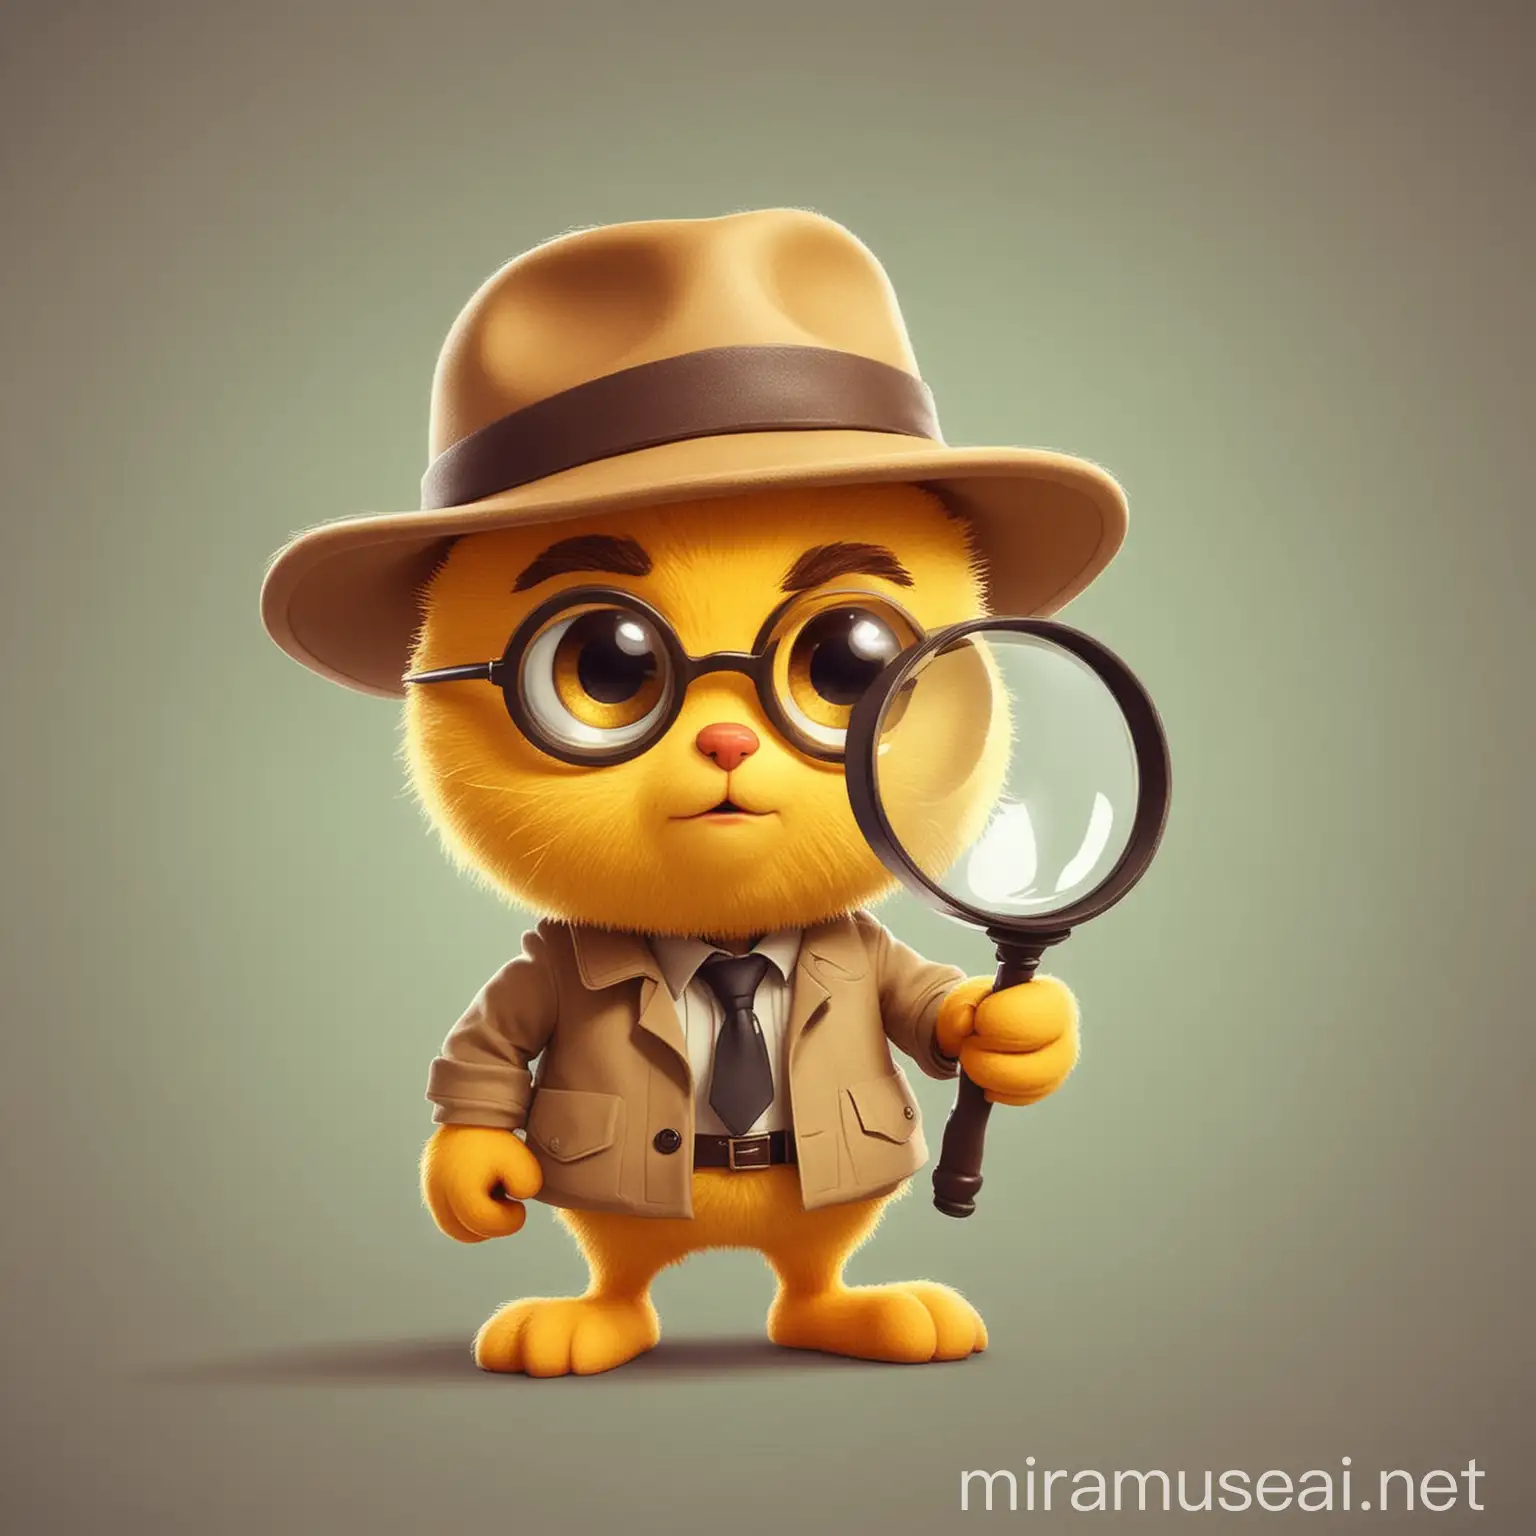 Draw a cute, curious mascot, like a small detective with a hat and a magnifying glass,make it with a bright yellow. cartoon style